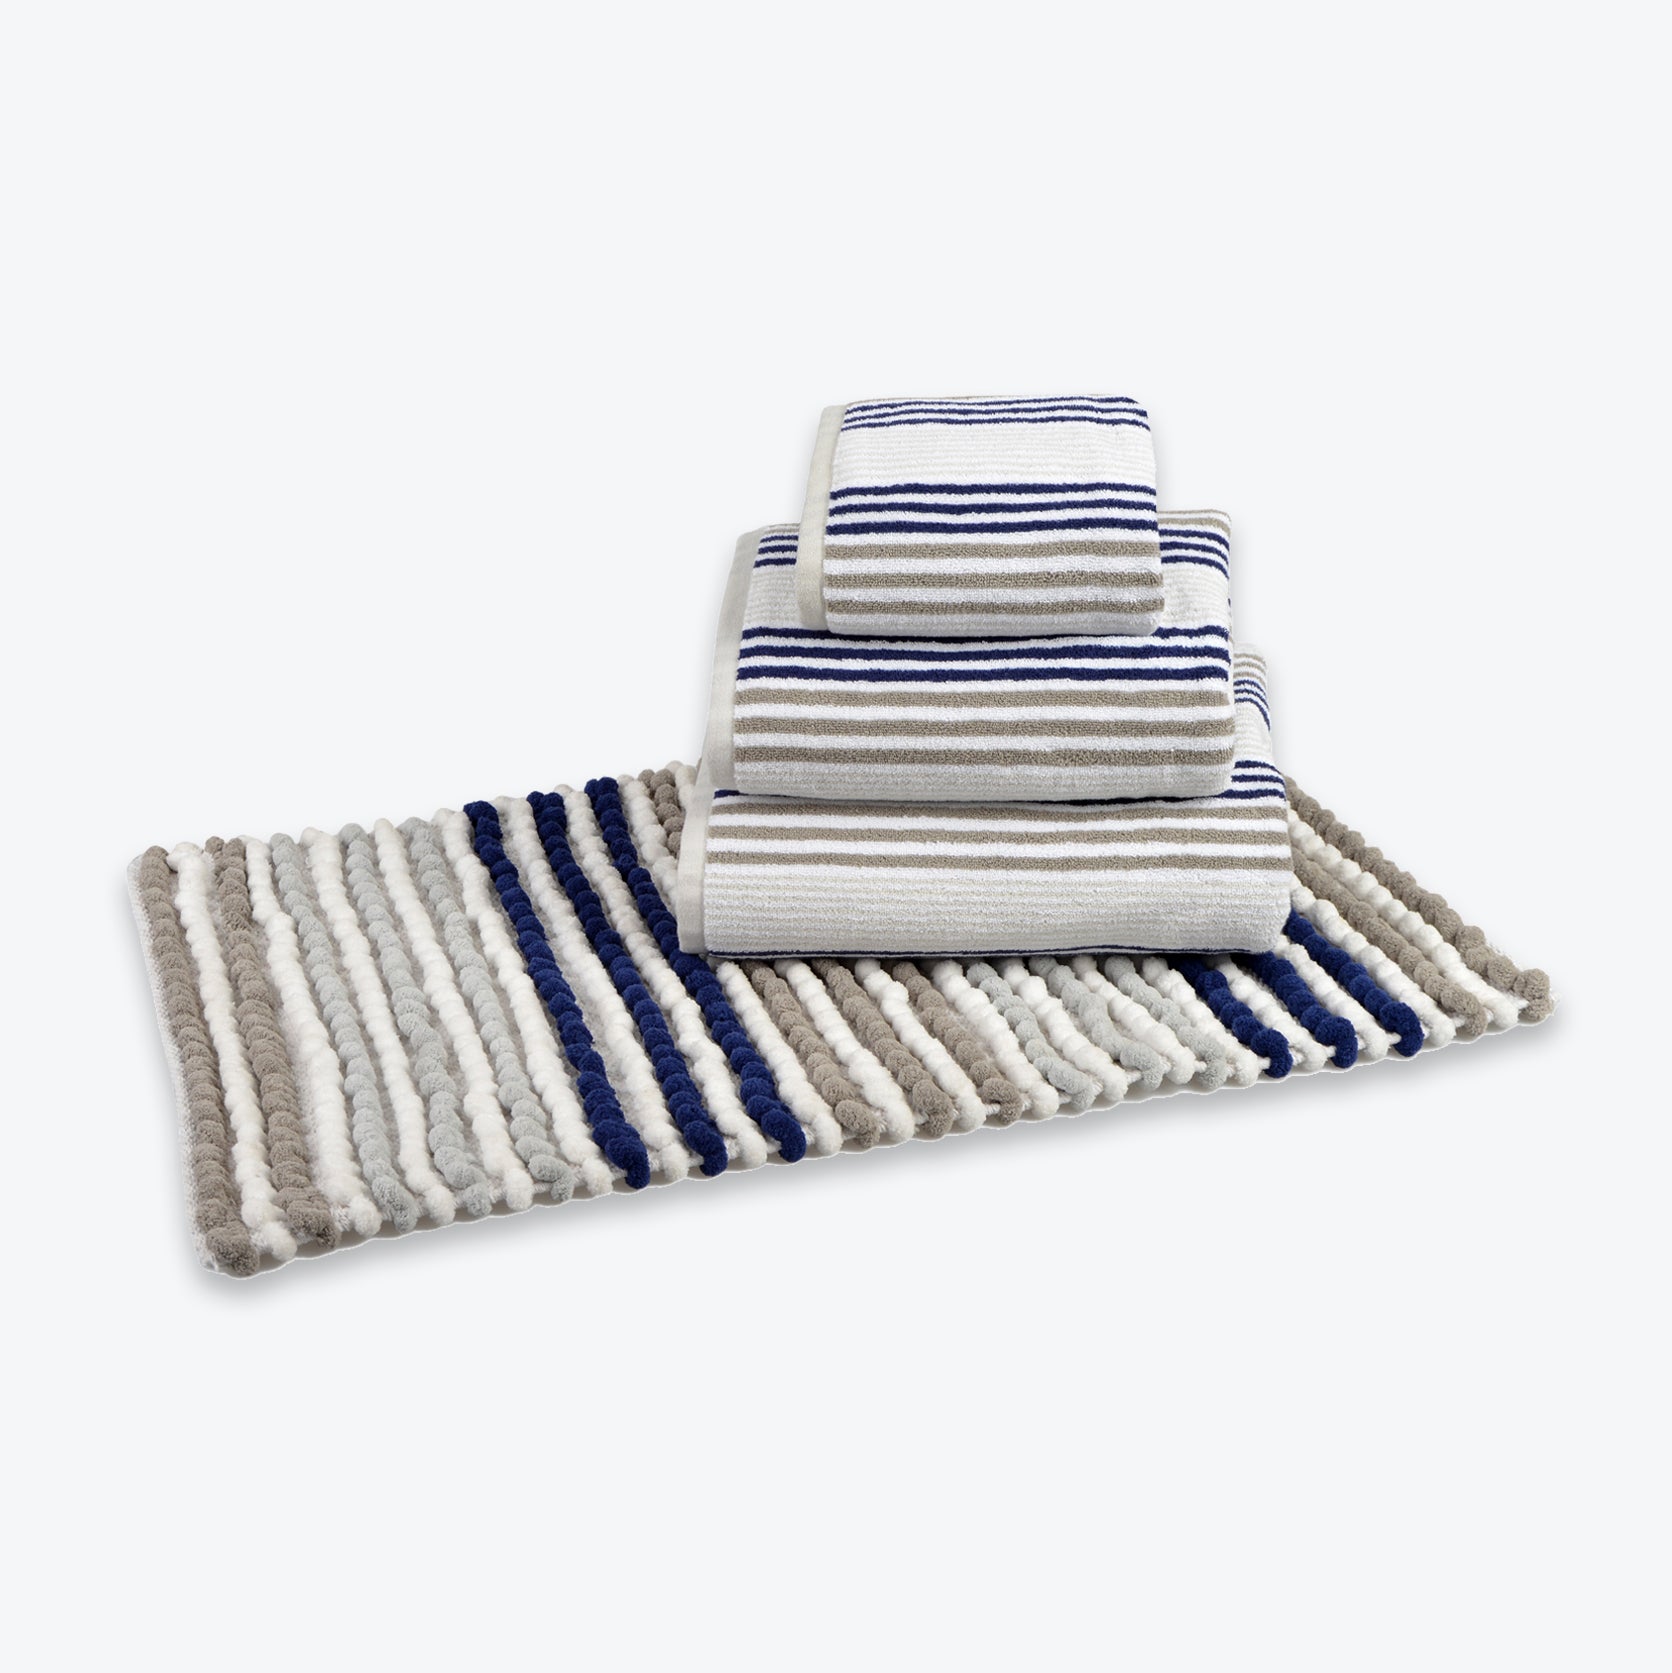 Navy Blue co-ordinating bathroom set chunky bobble bath mat with coordinated blue striped towels